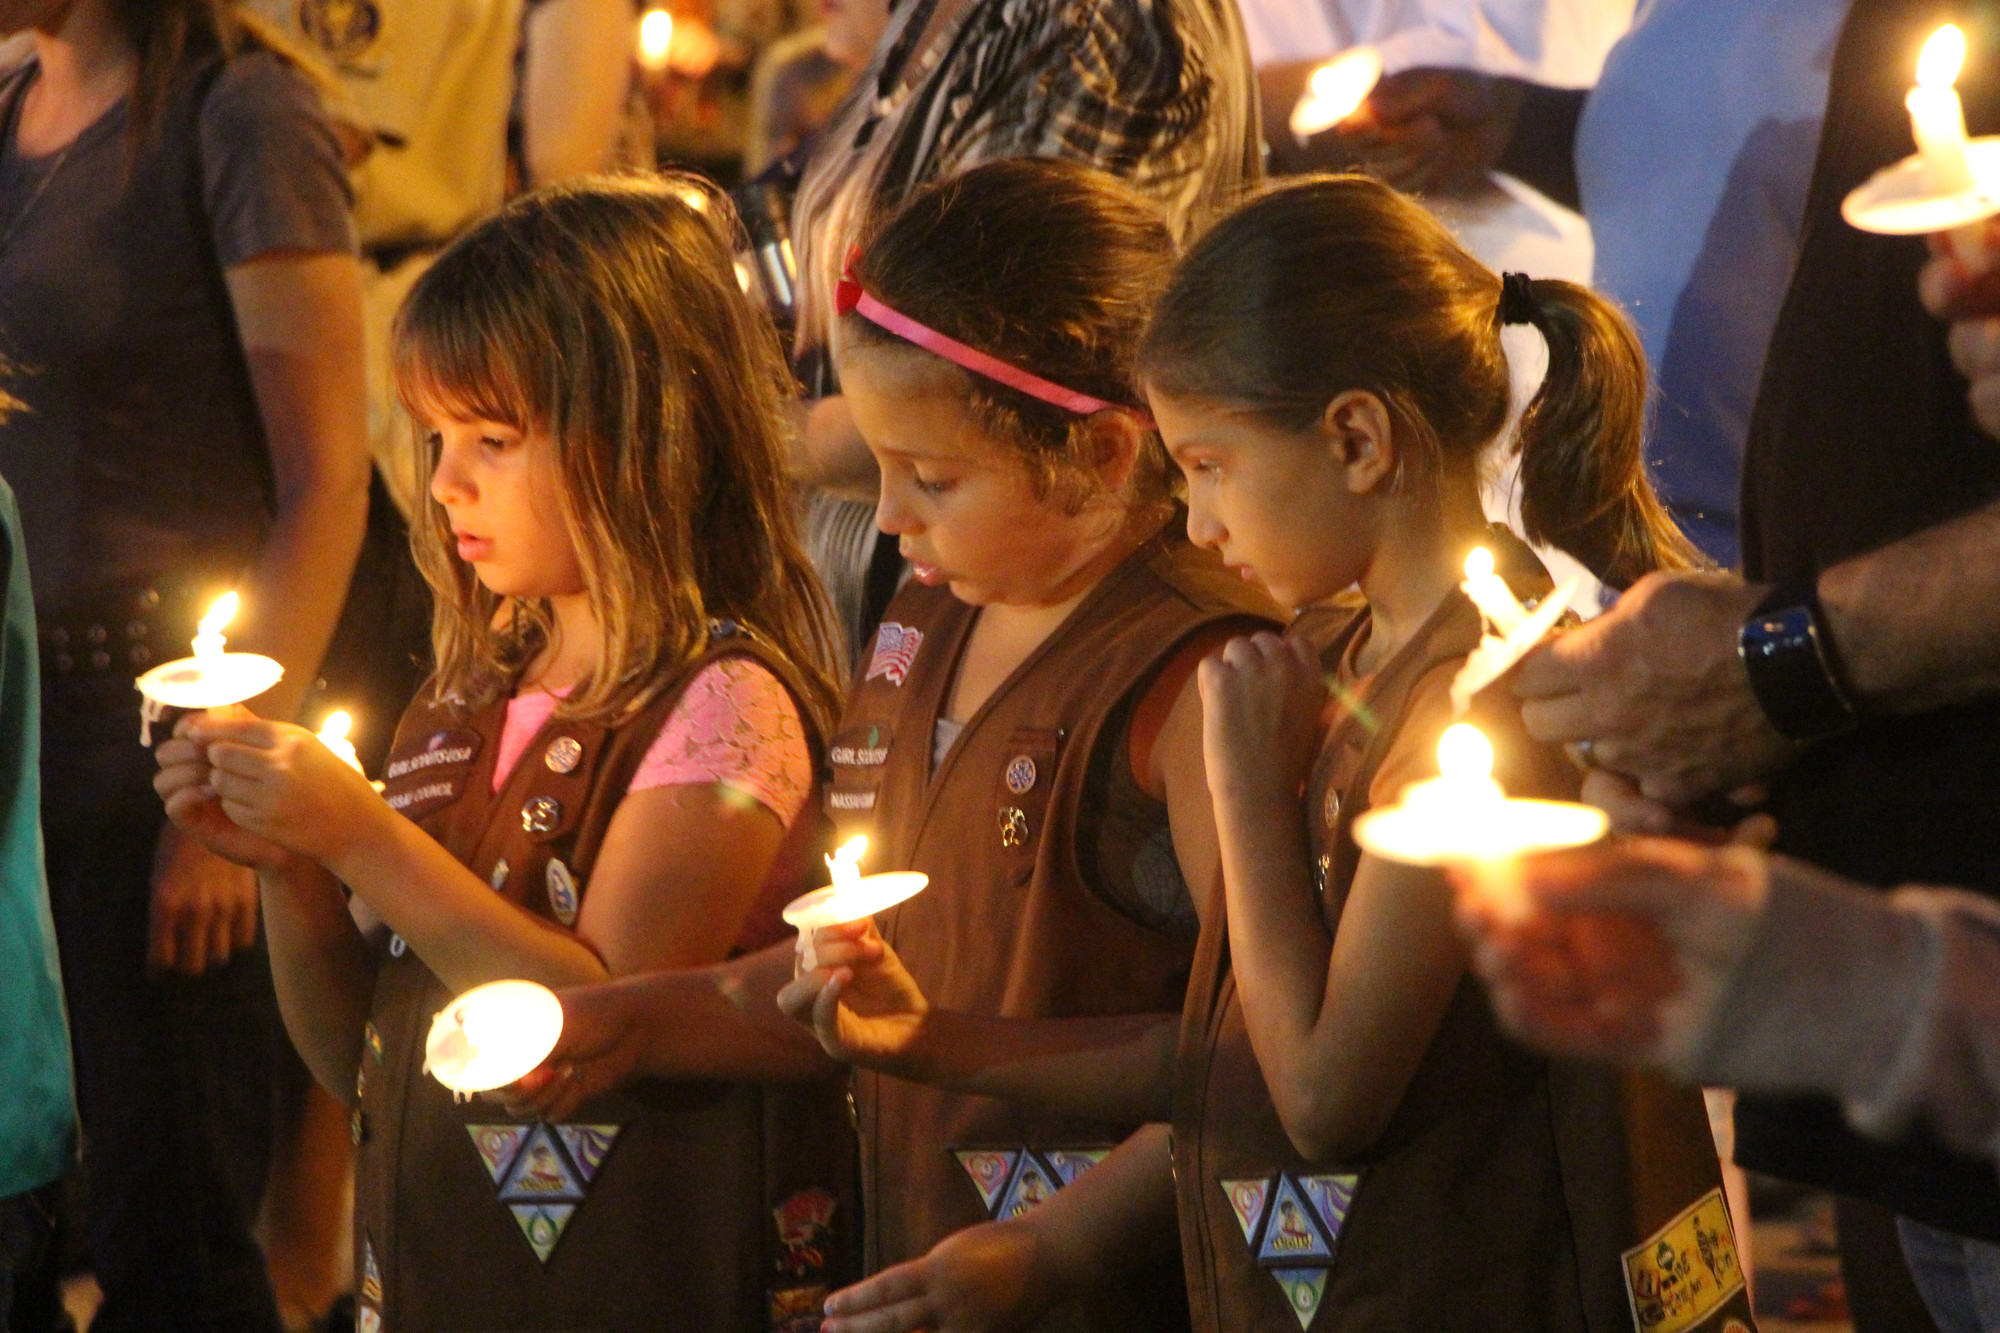 East Meadow Girl Scout Brownies Amanda Morris, 8, far left, Juliana Alagna, 7, and Erin Schwartz, 8, were among 300 residents who lit a candle last week in
remembrance of the thousands who died on Sept. 11, 2001.